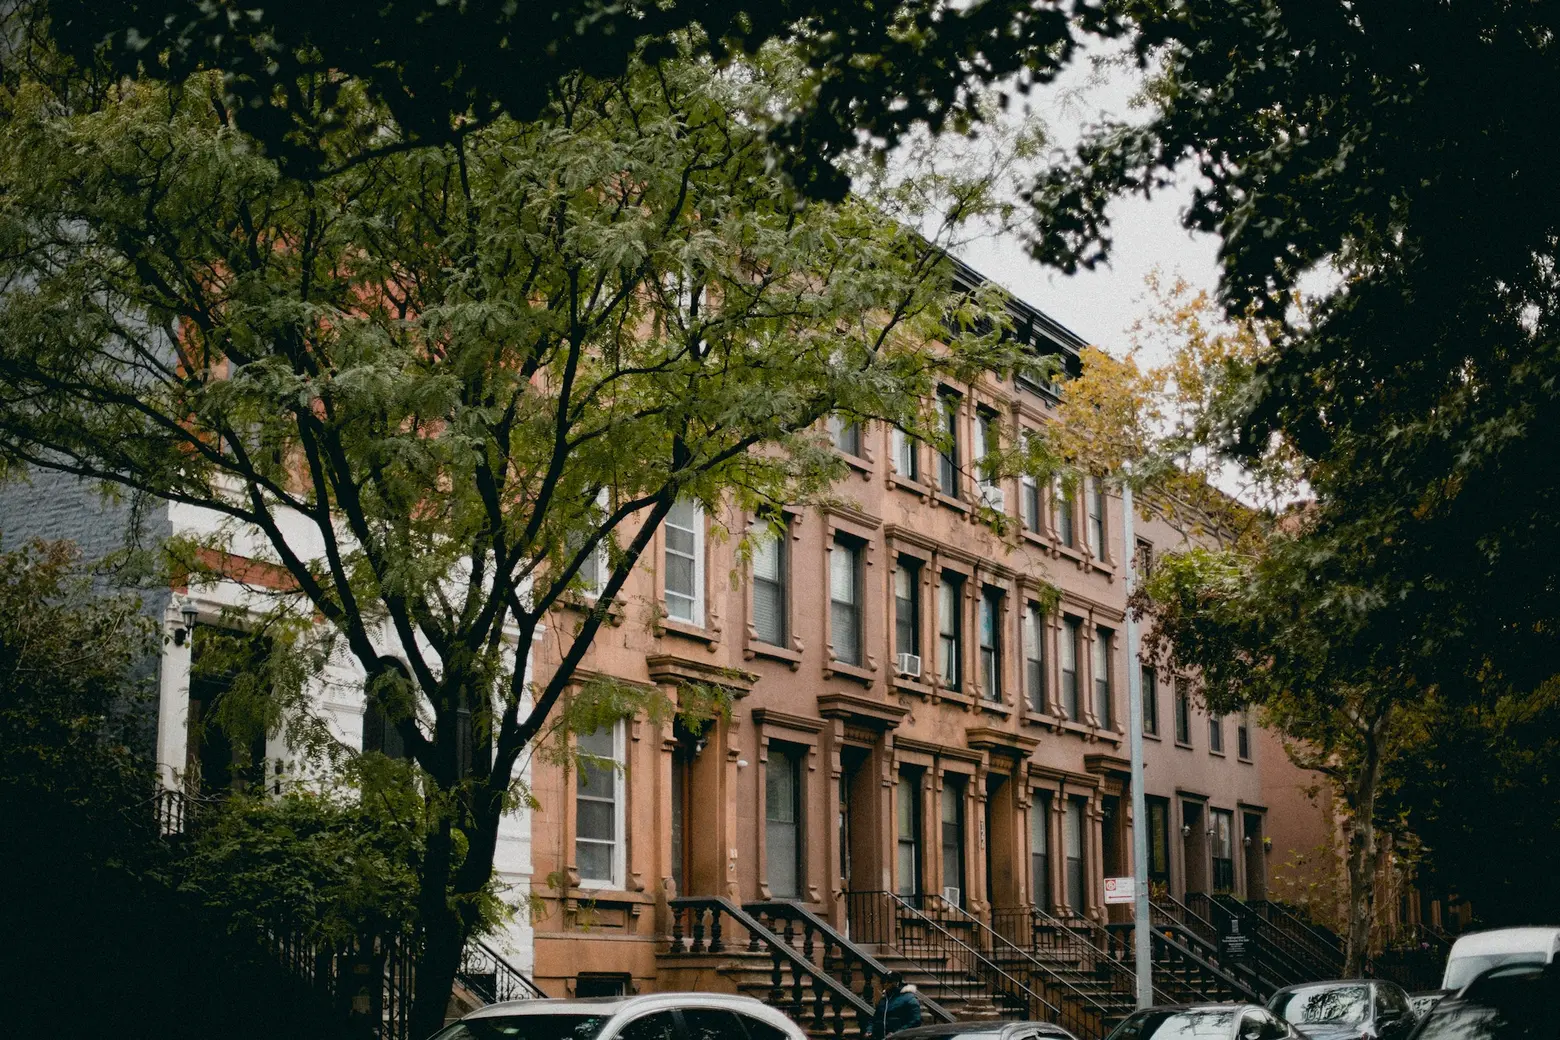 NYC is offering low-income, first-time homebuyers $100K toward down payments